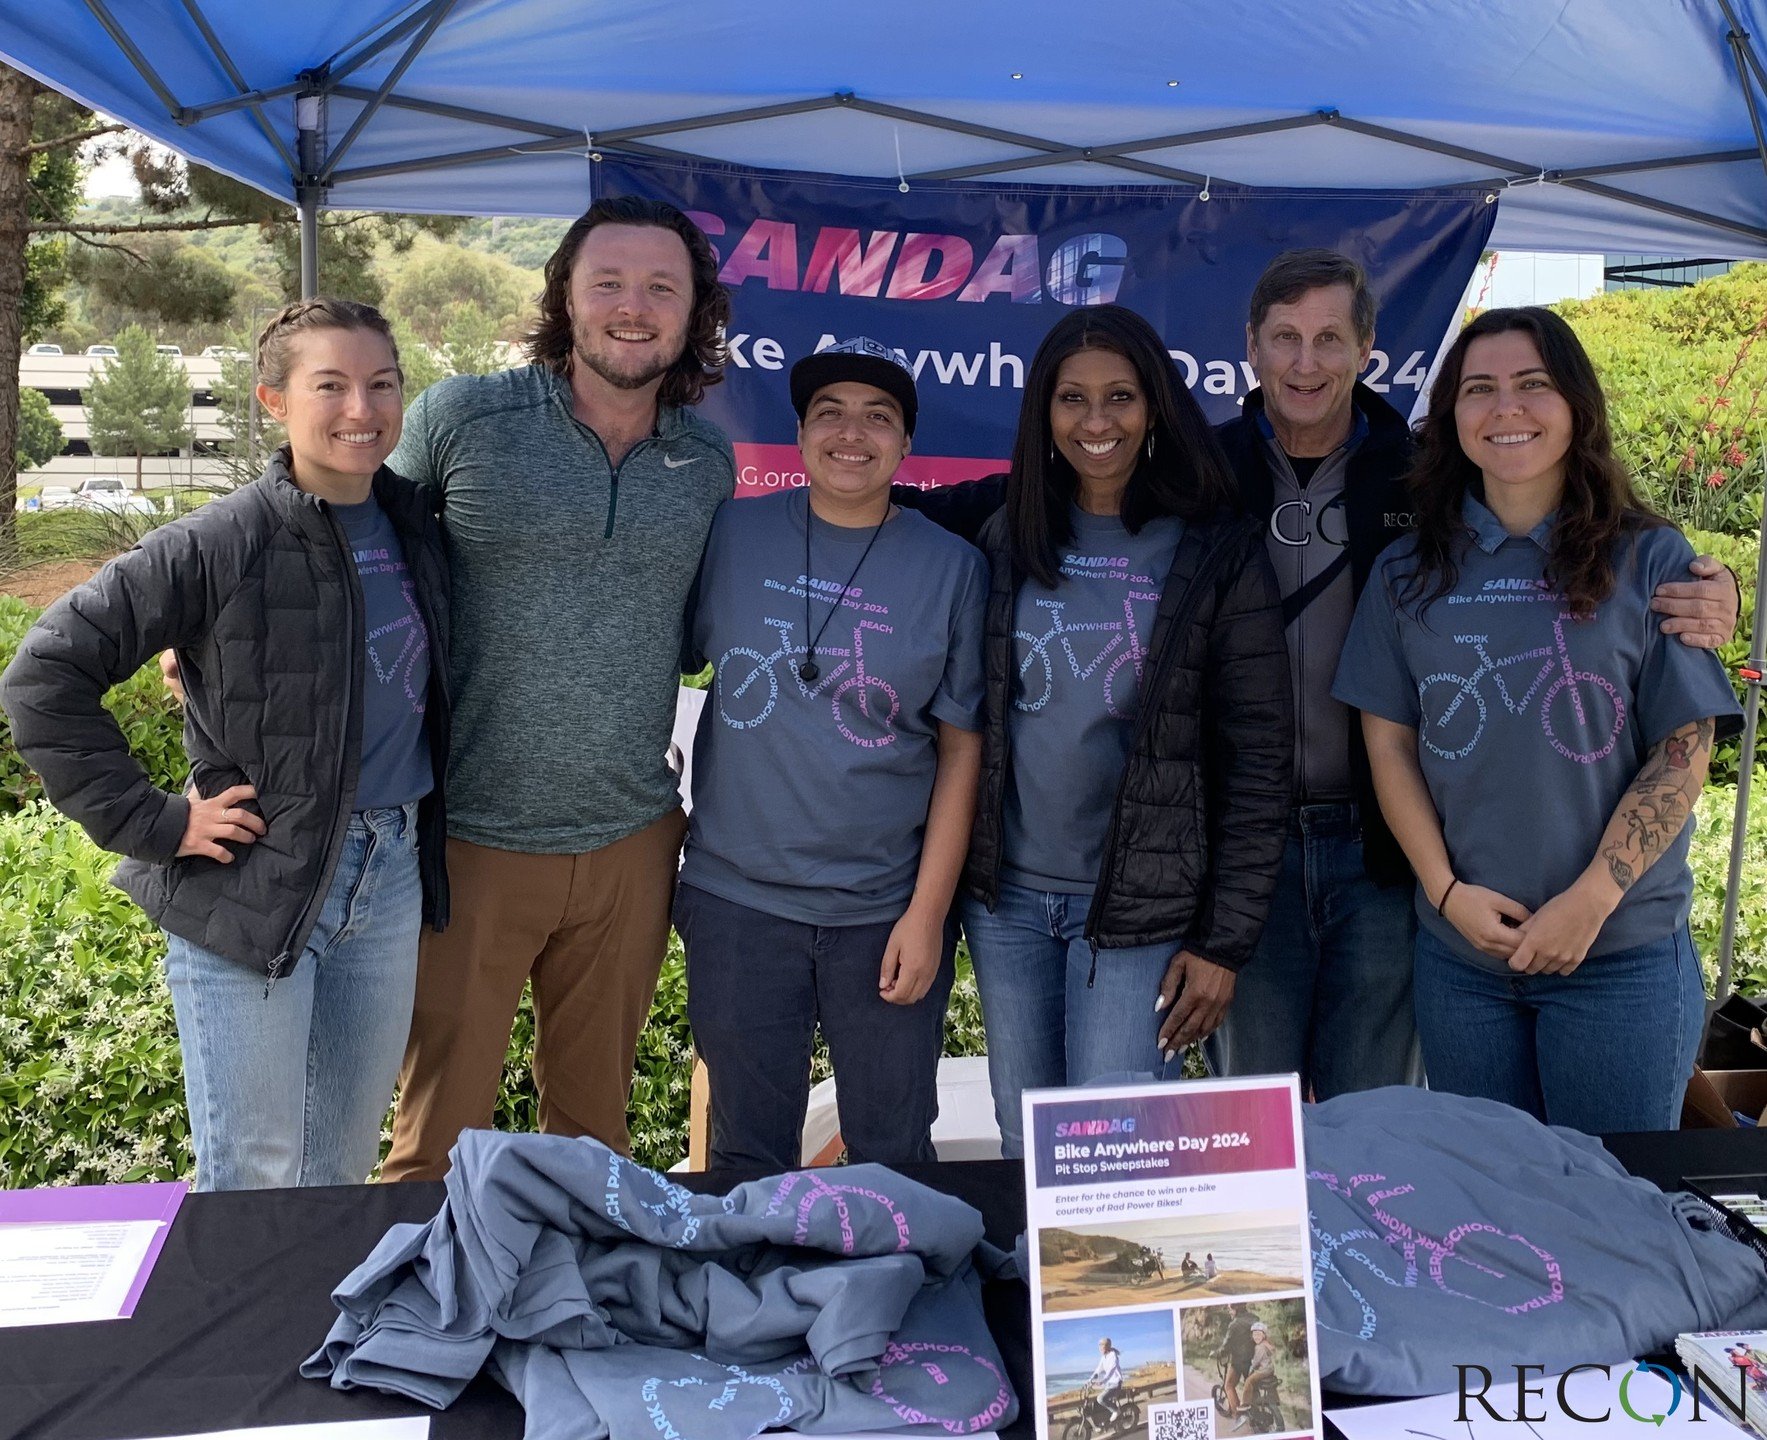 Thanks to all the cyclists who stopped by the @reconenv Pit Stop for #BikeAnywhereDay this morning, sponsored by @sandagregion! It was great to see many repeat customers and clients, to meet new cyclists, and to hand out free t-shirts, cycling goodie